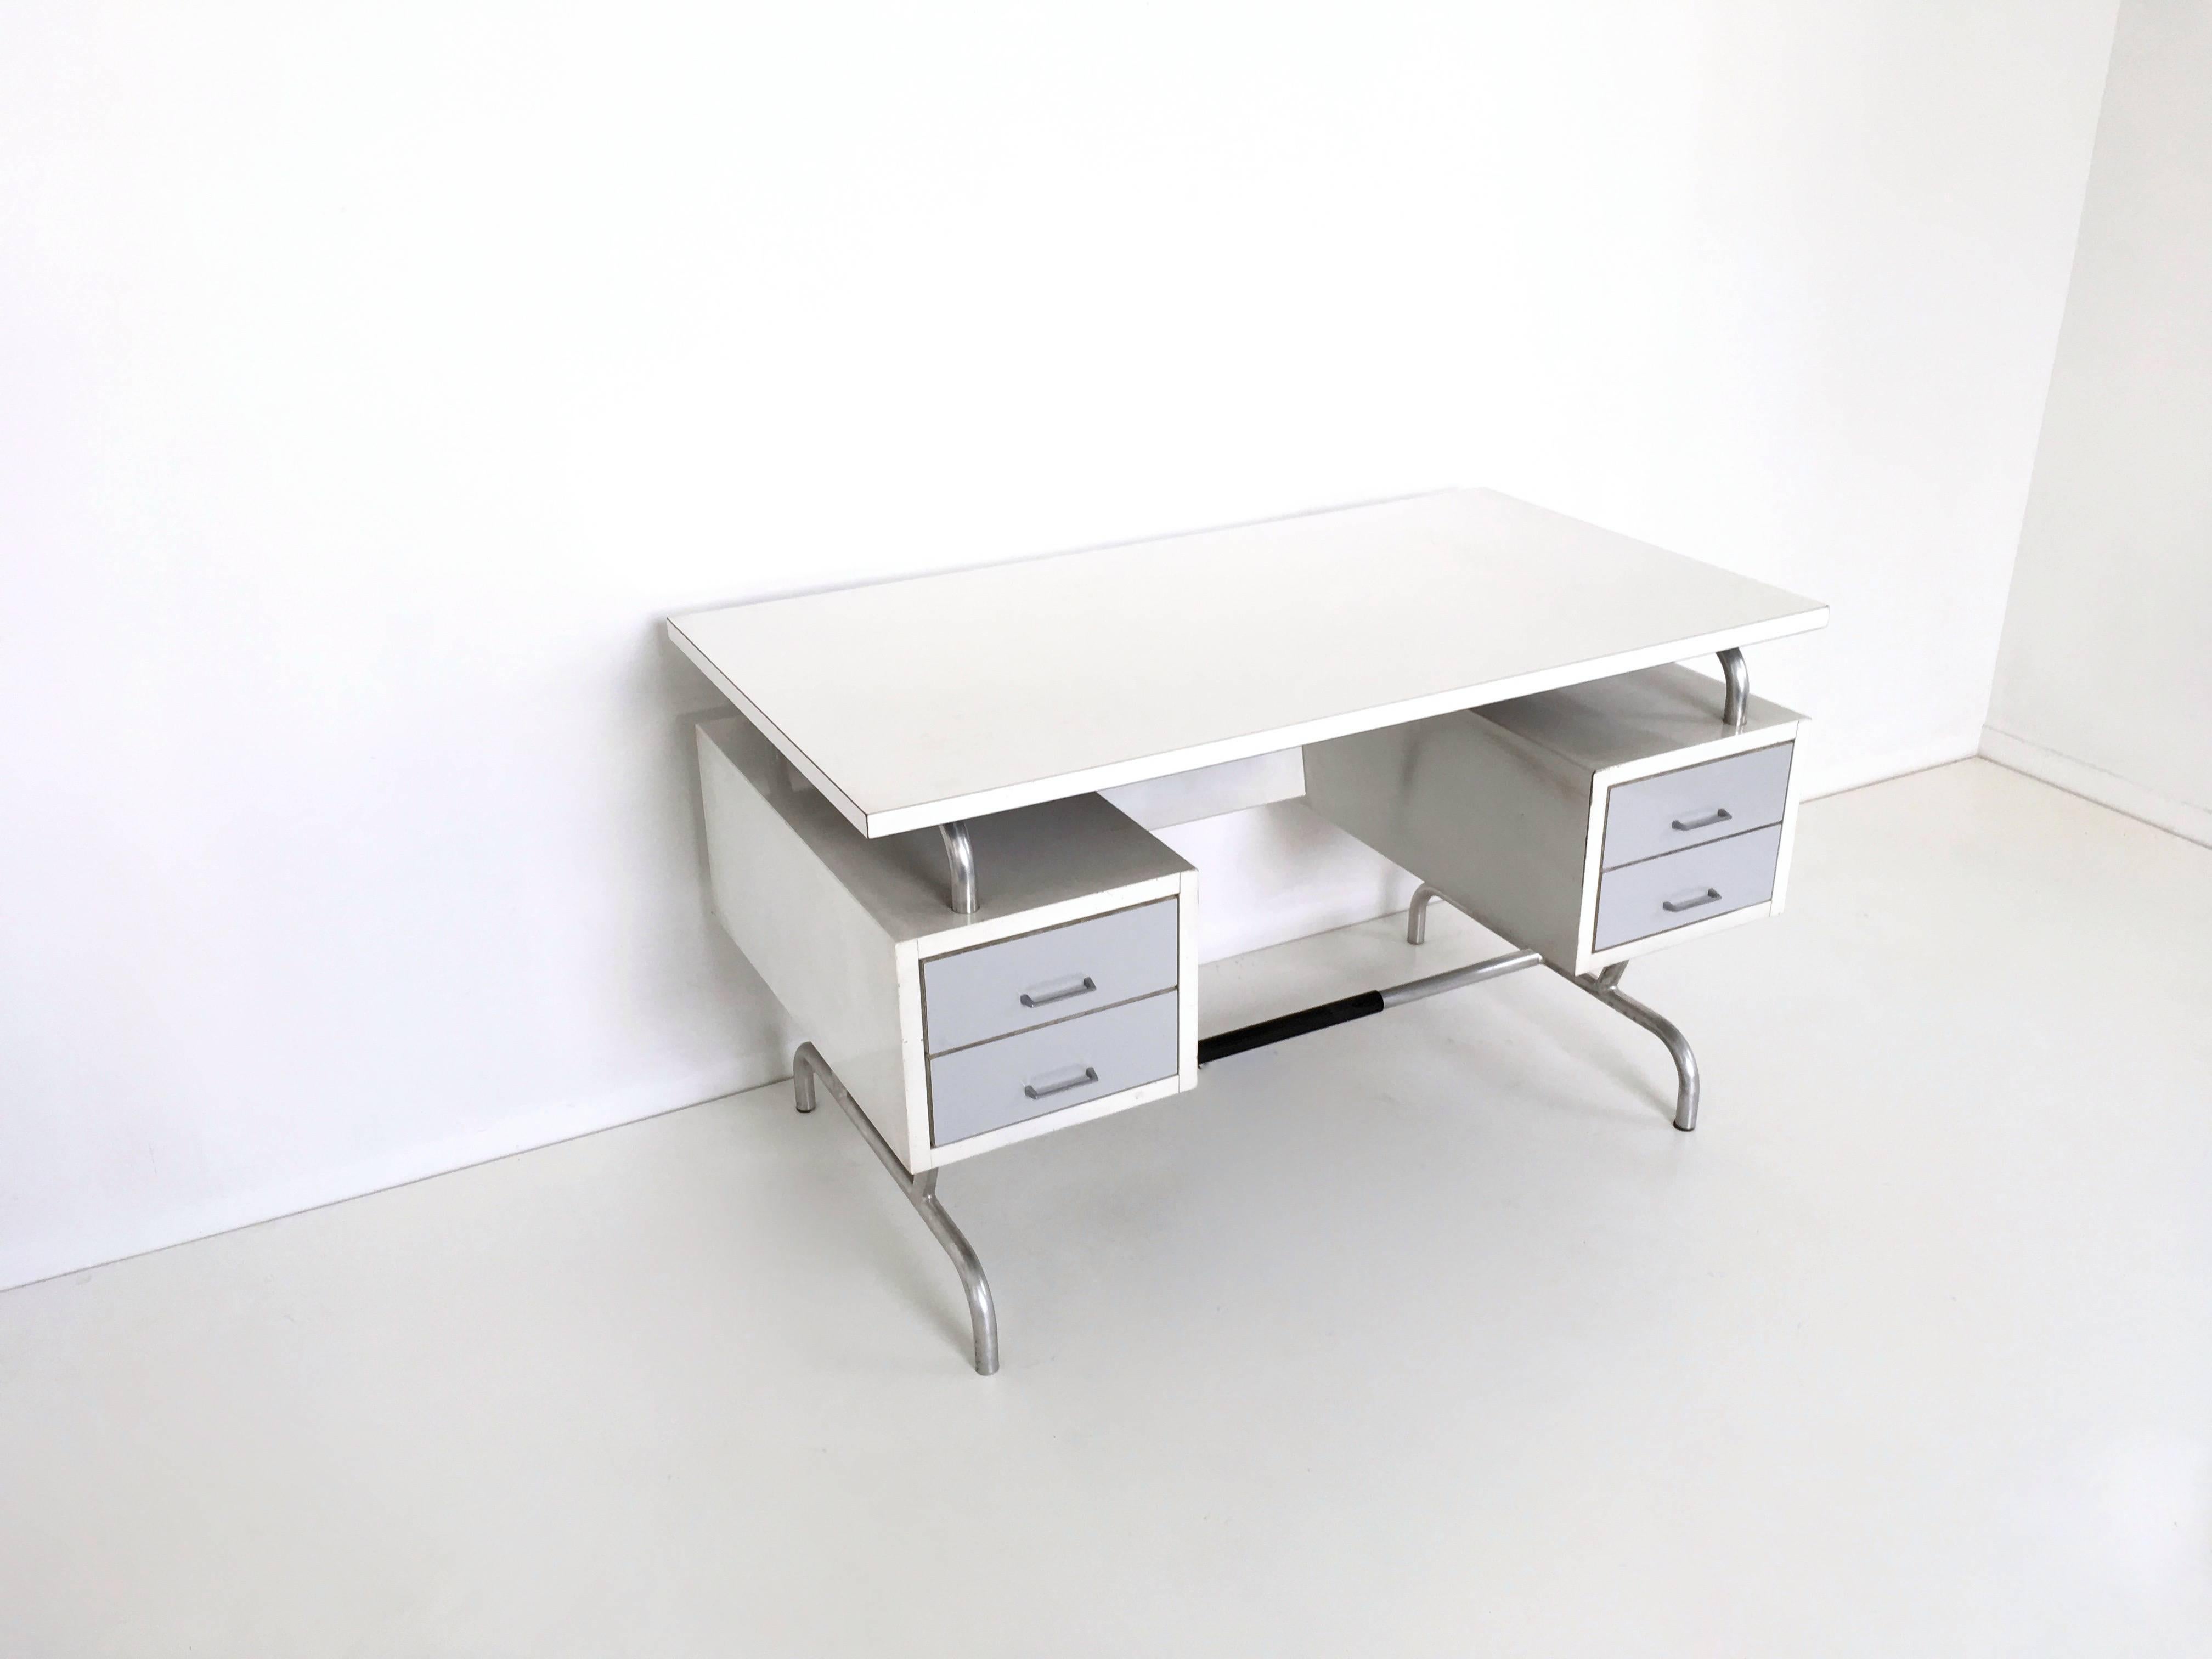 This desk is made from laminated wood, painted metal, aluminum and Formica.